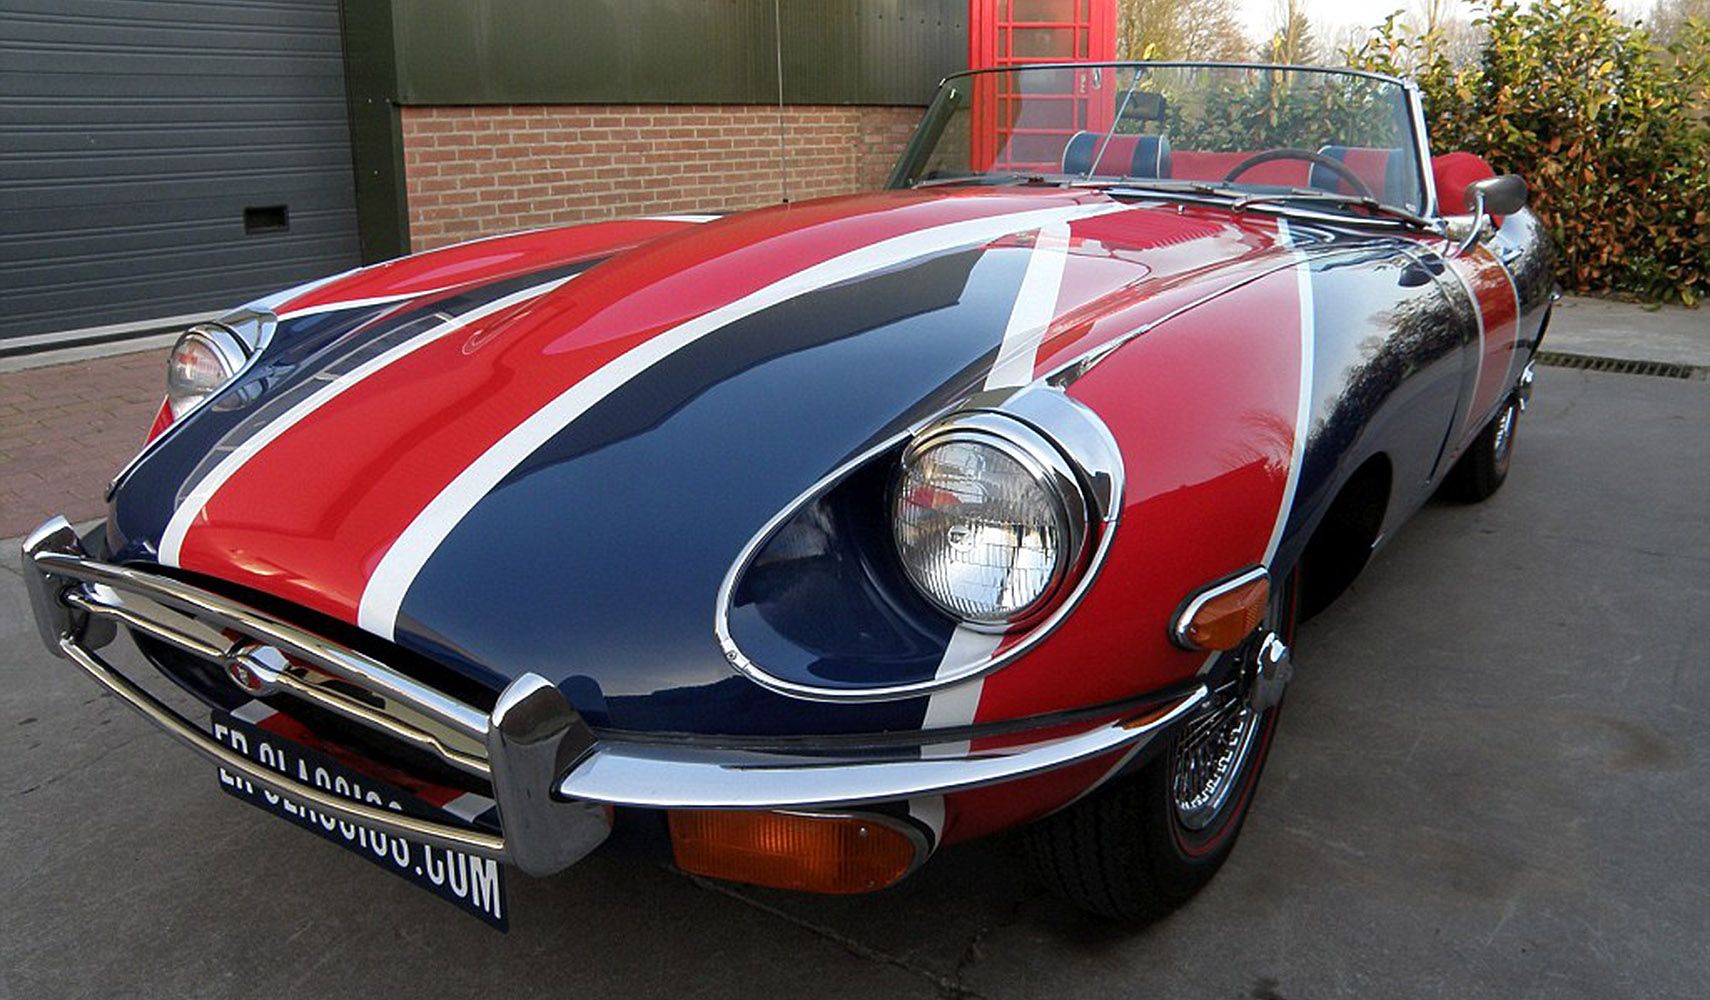 Jaguar E-Type From Austin Powers Carried A 4.2-Liter Inline-Six Cylinder, That Made More Than 265 Horses